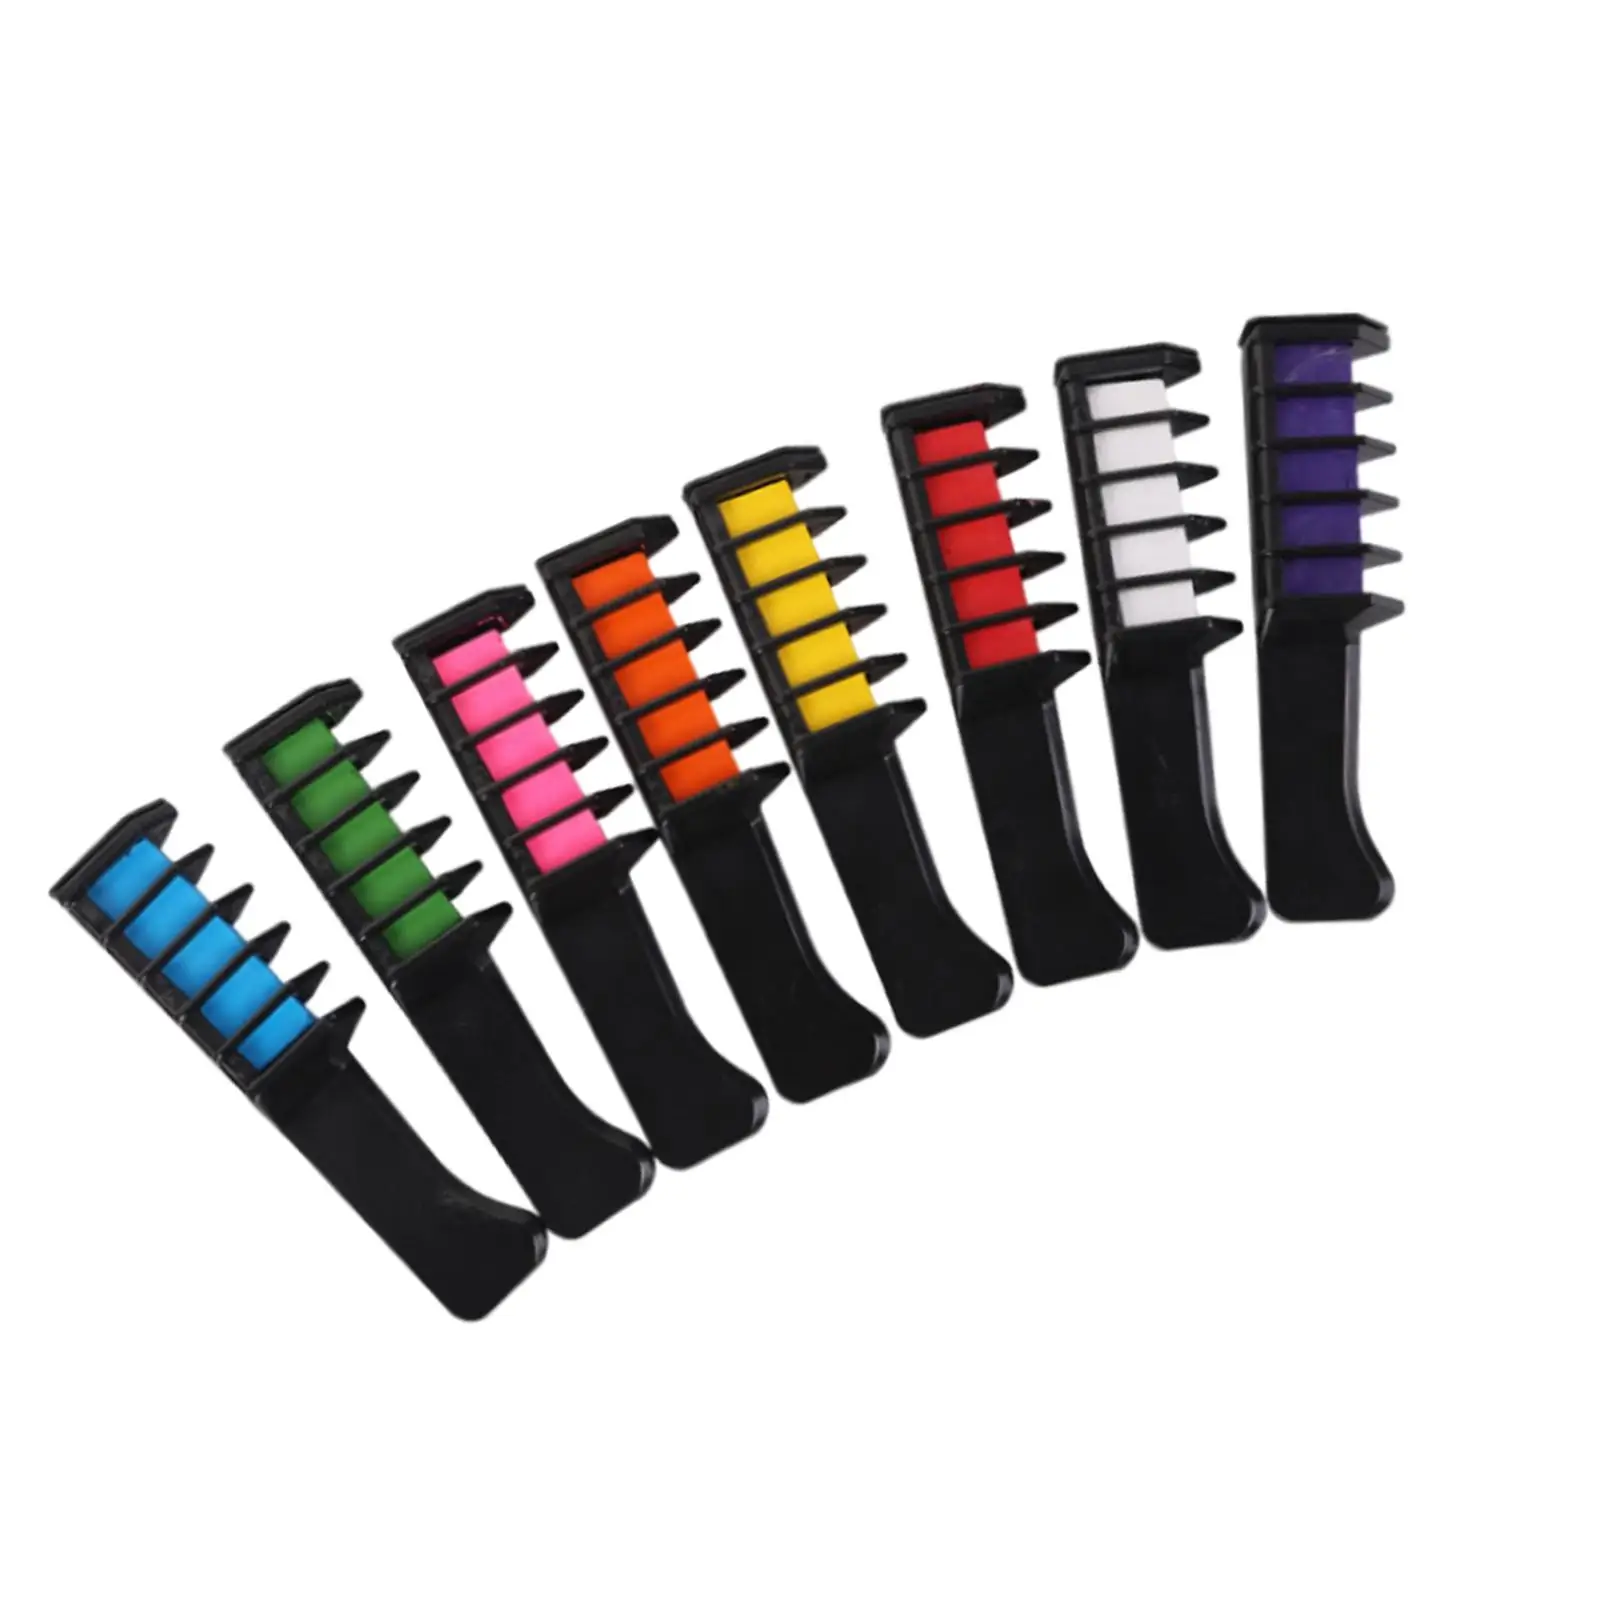 12x Disposable Dyeing Combs Hair Dye DIY Hairdressing Styling Tool Hair Color Comb for Birthday Party Festivals Party Halloween